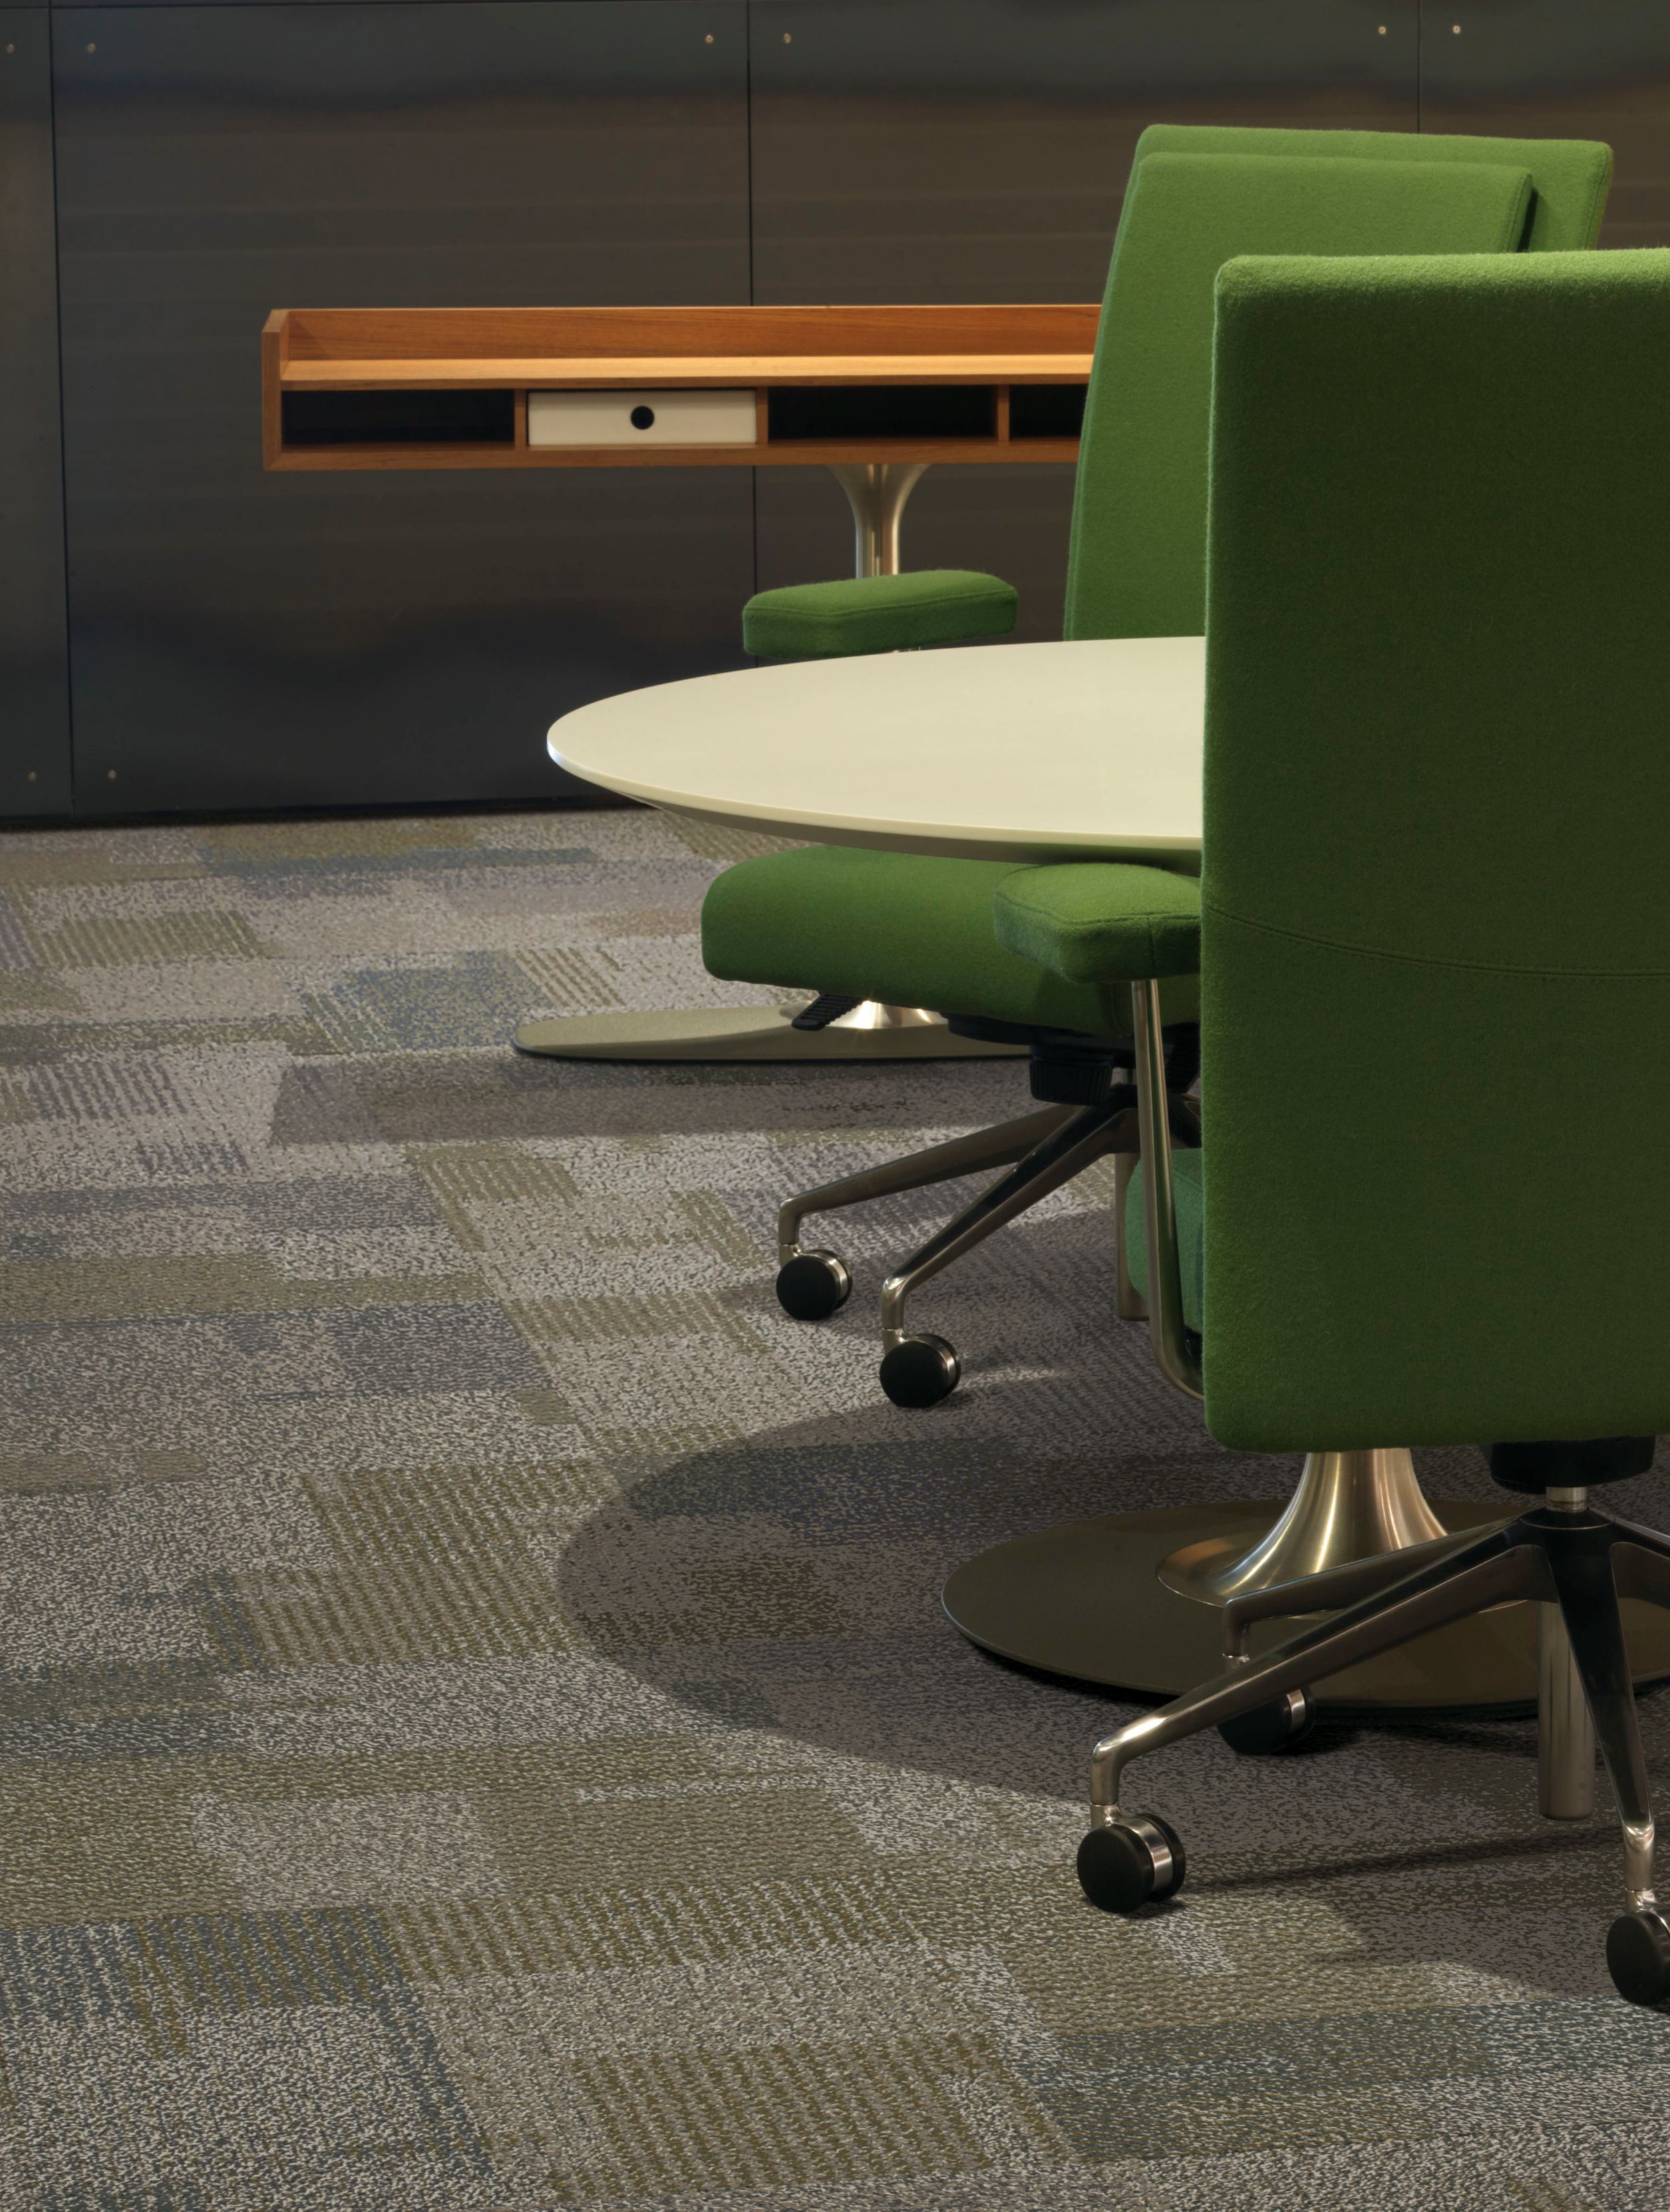 Interface Entropy carpet tile in room with green chairs and wooden shelf in background image number 4